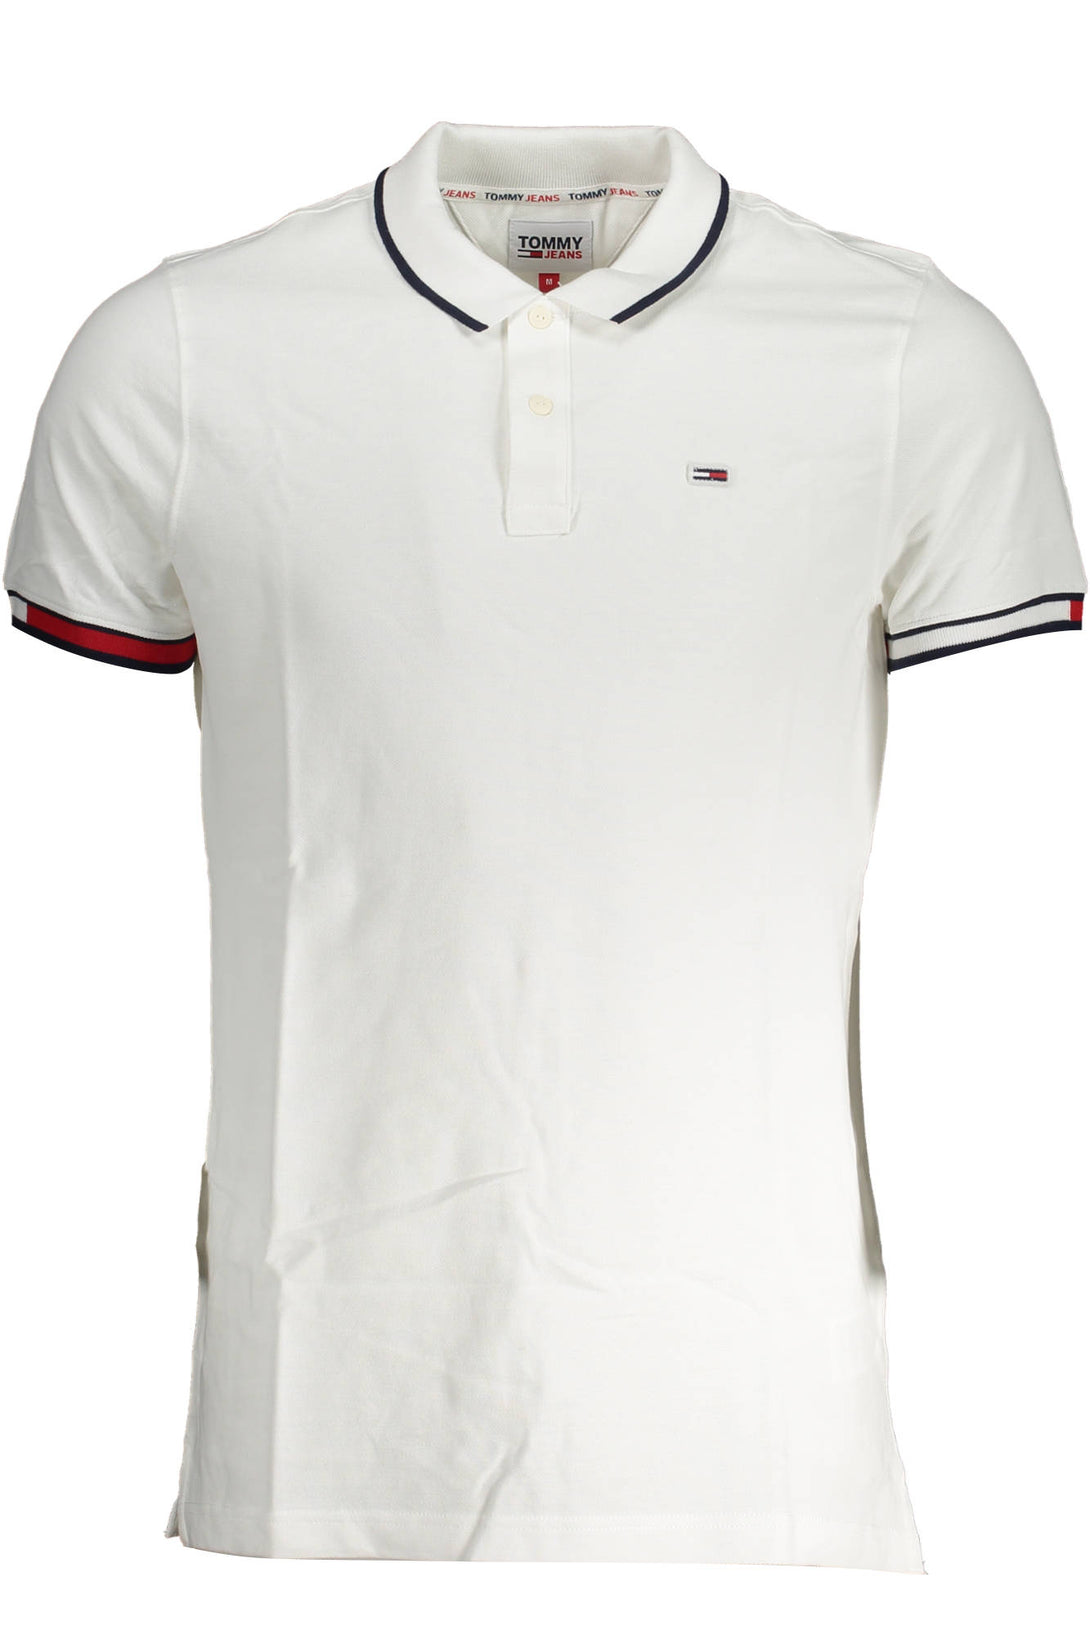 tommy hilfiger polo manches courtes homme blanc